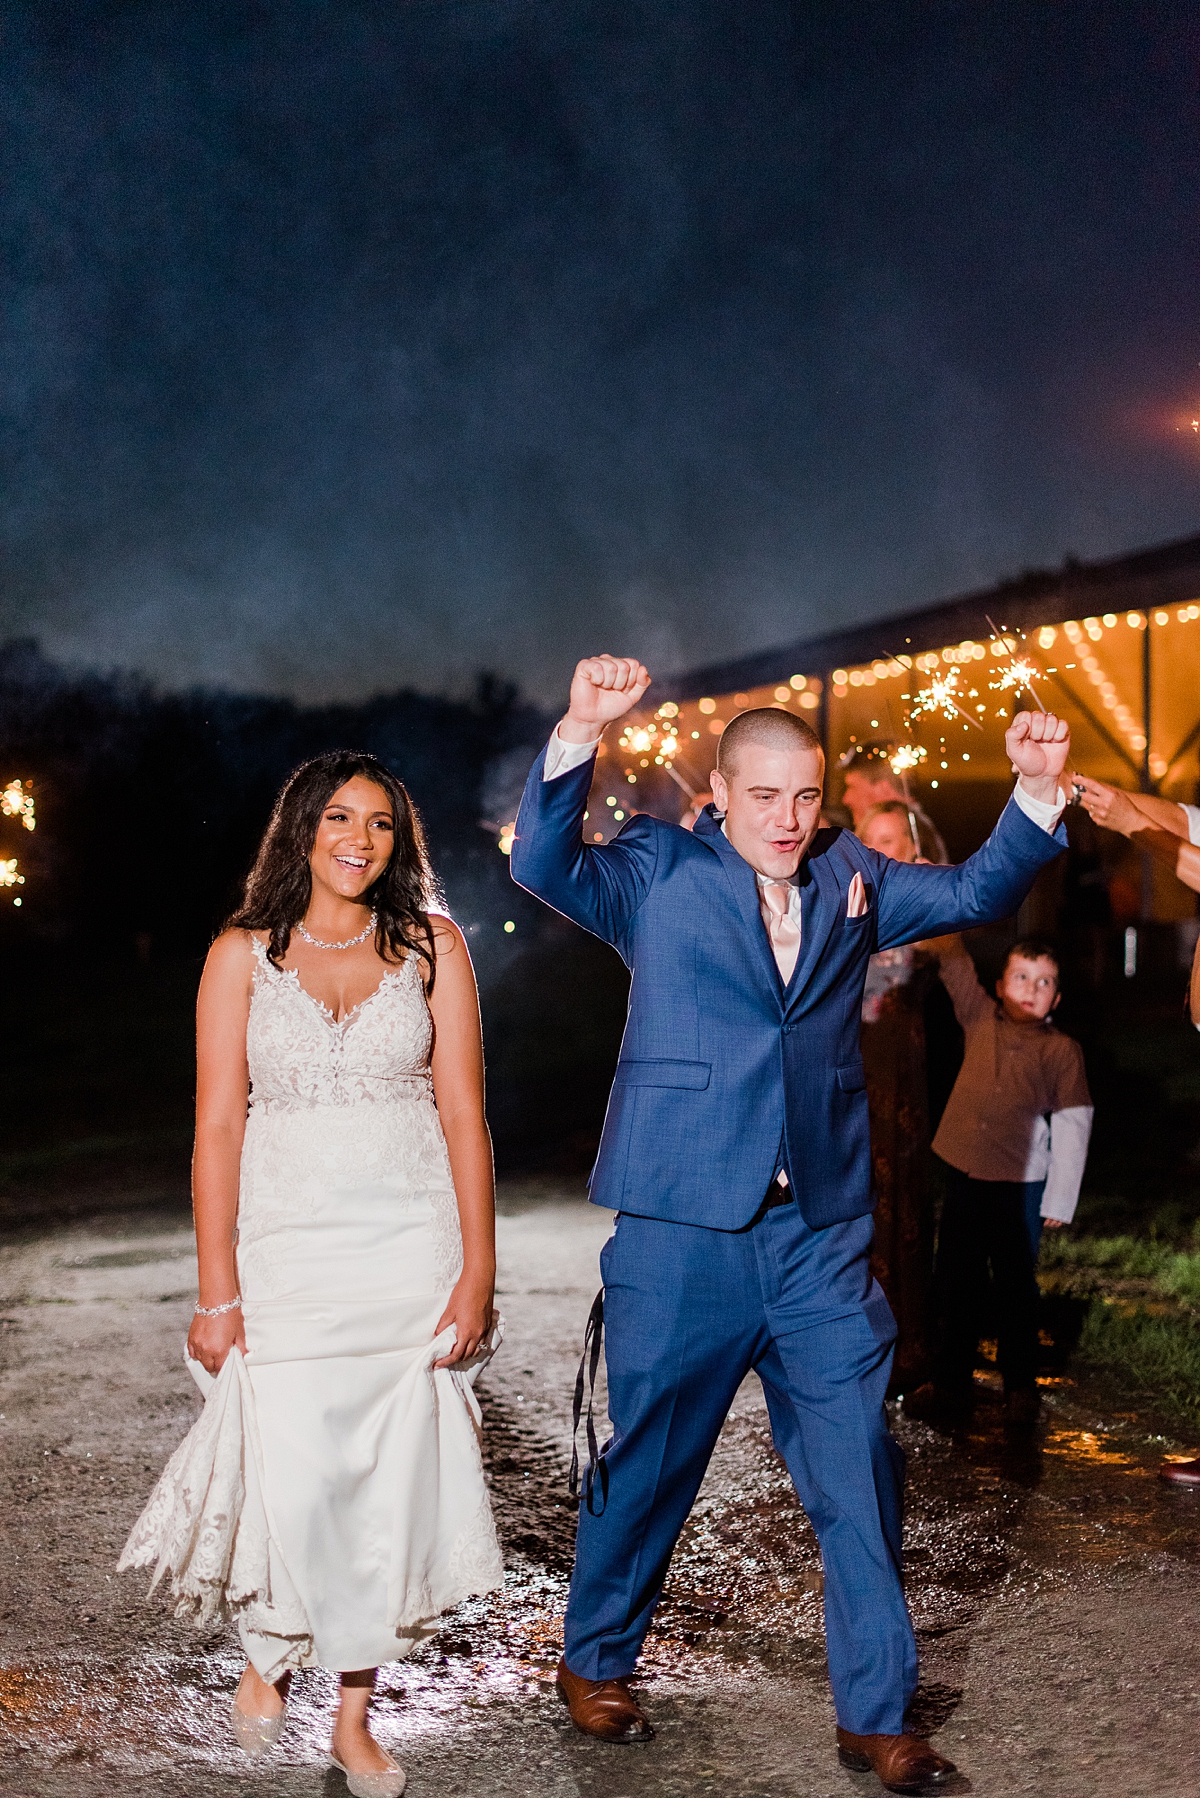 Sparkler Exit at Arbor Haven Summer Wedding Reception. Wedding Photography by Richmond Wedding Photographer Kailey Brianne Photography. 